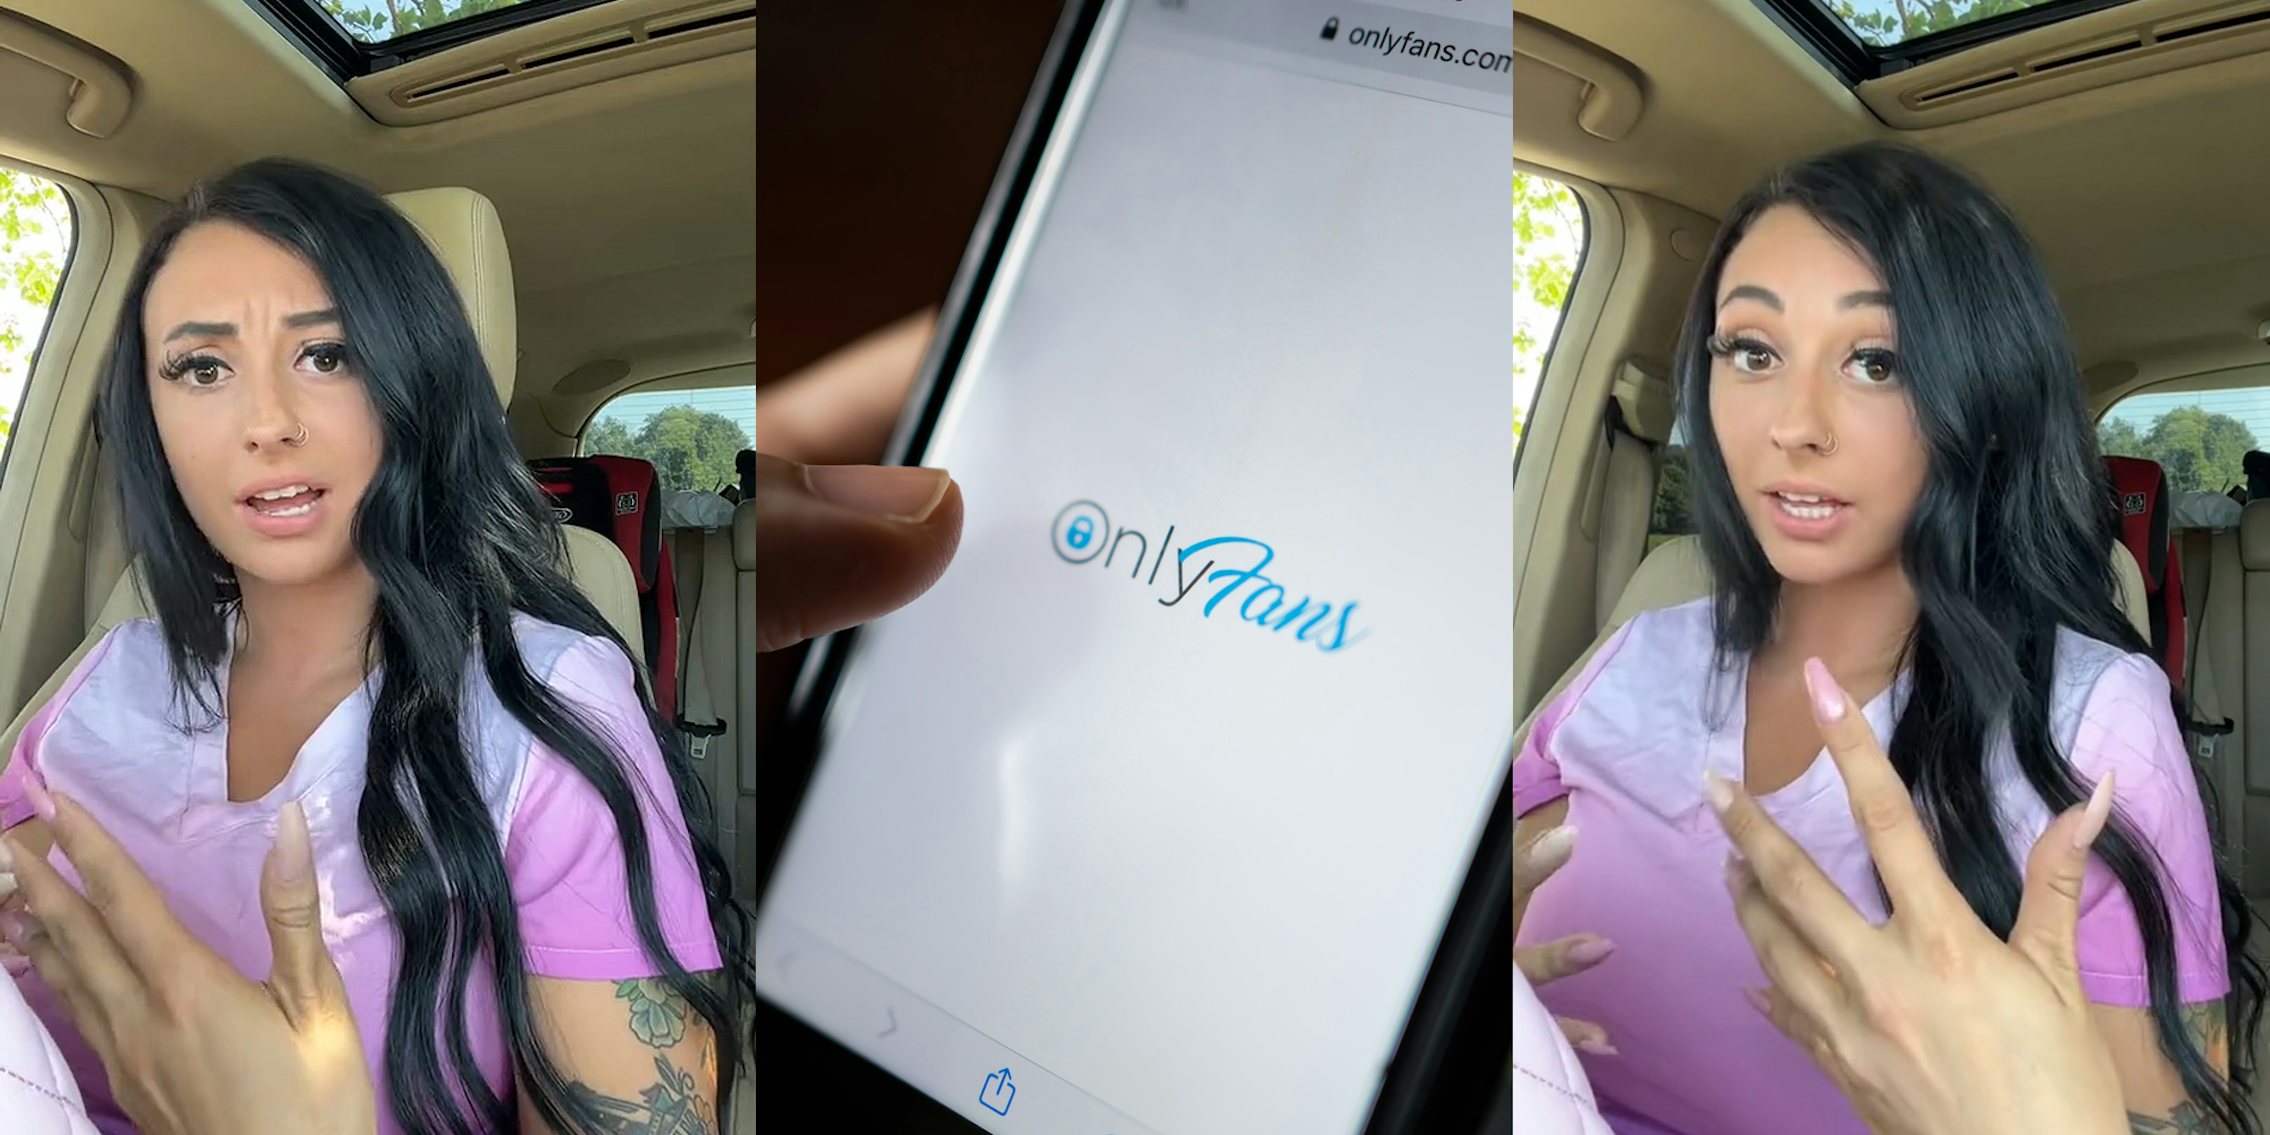 Onlyfans Creator Says She Was Fired From Nursing Job 